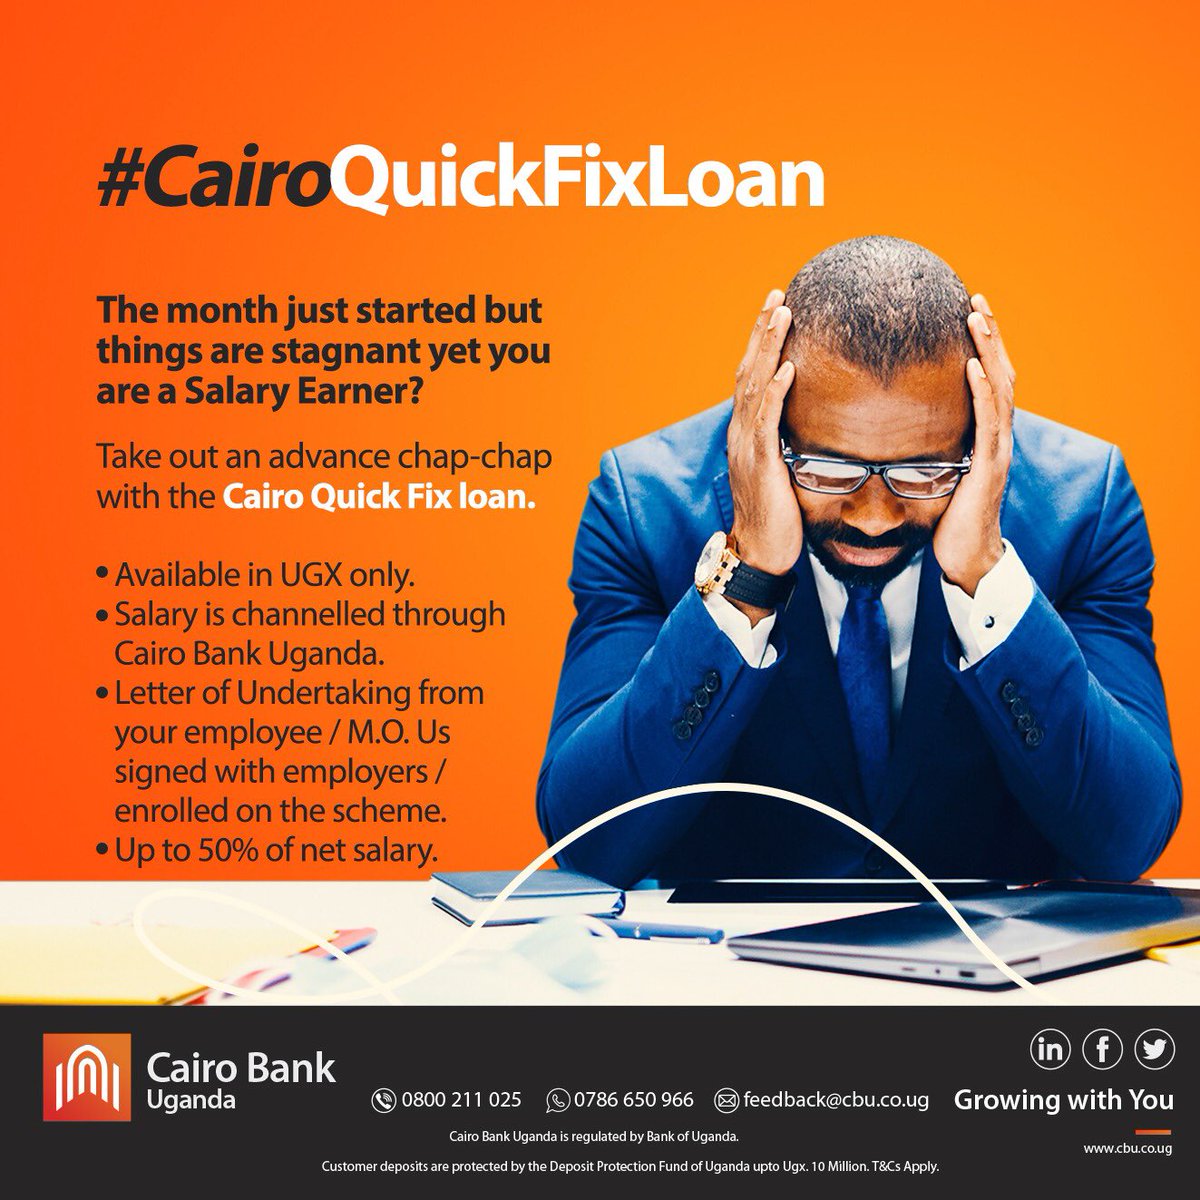 Are you a Salary Earner who’s caught between a rock & a hard place yet the month has just started?

Well, run into our open arms. We have have the Cairo Quick  Fix Loan; available in UGX, up to 50% of net salary, etc.

#CairoBank #CairoQuickFixLoan #SalaryEarner